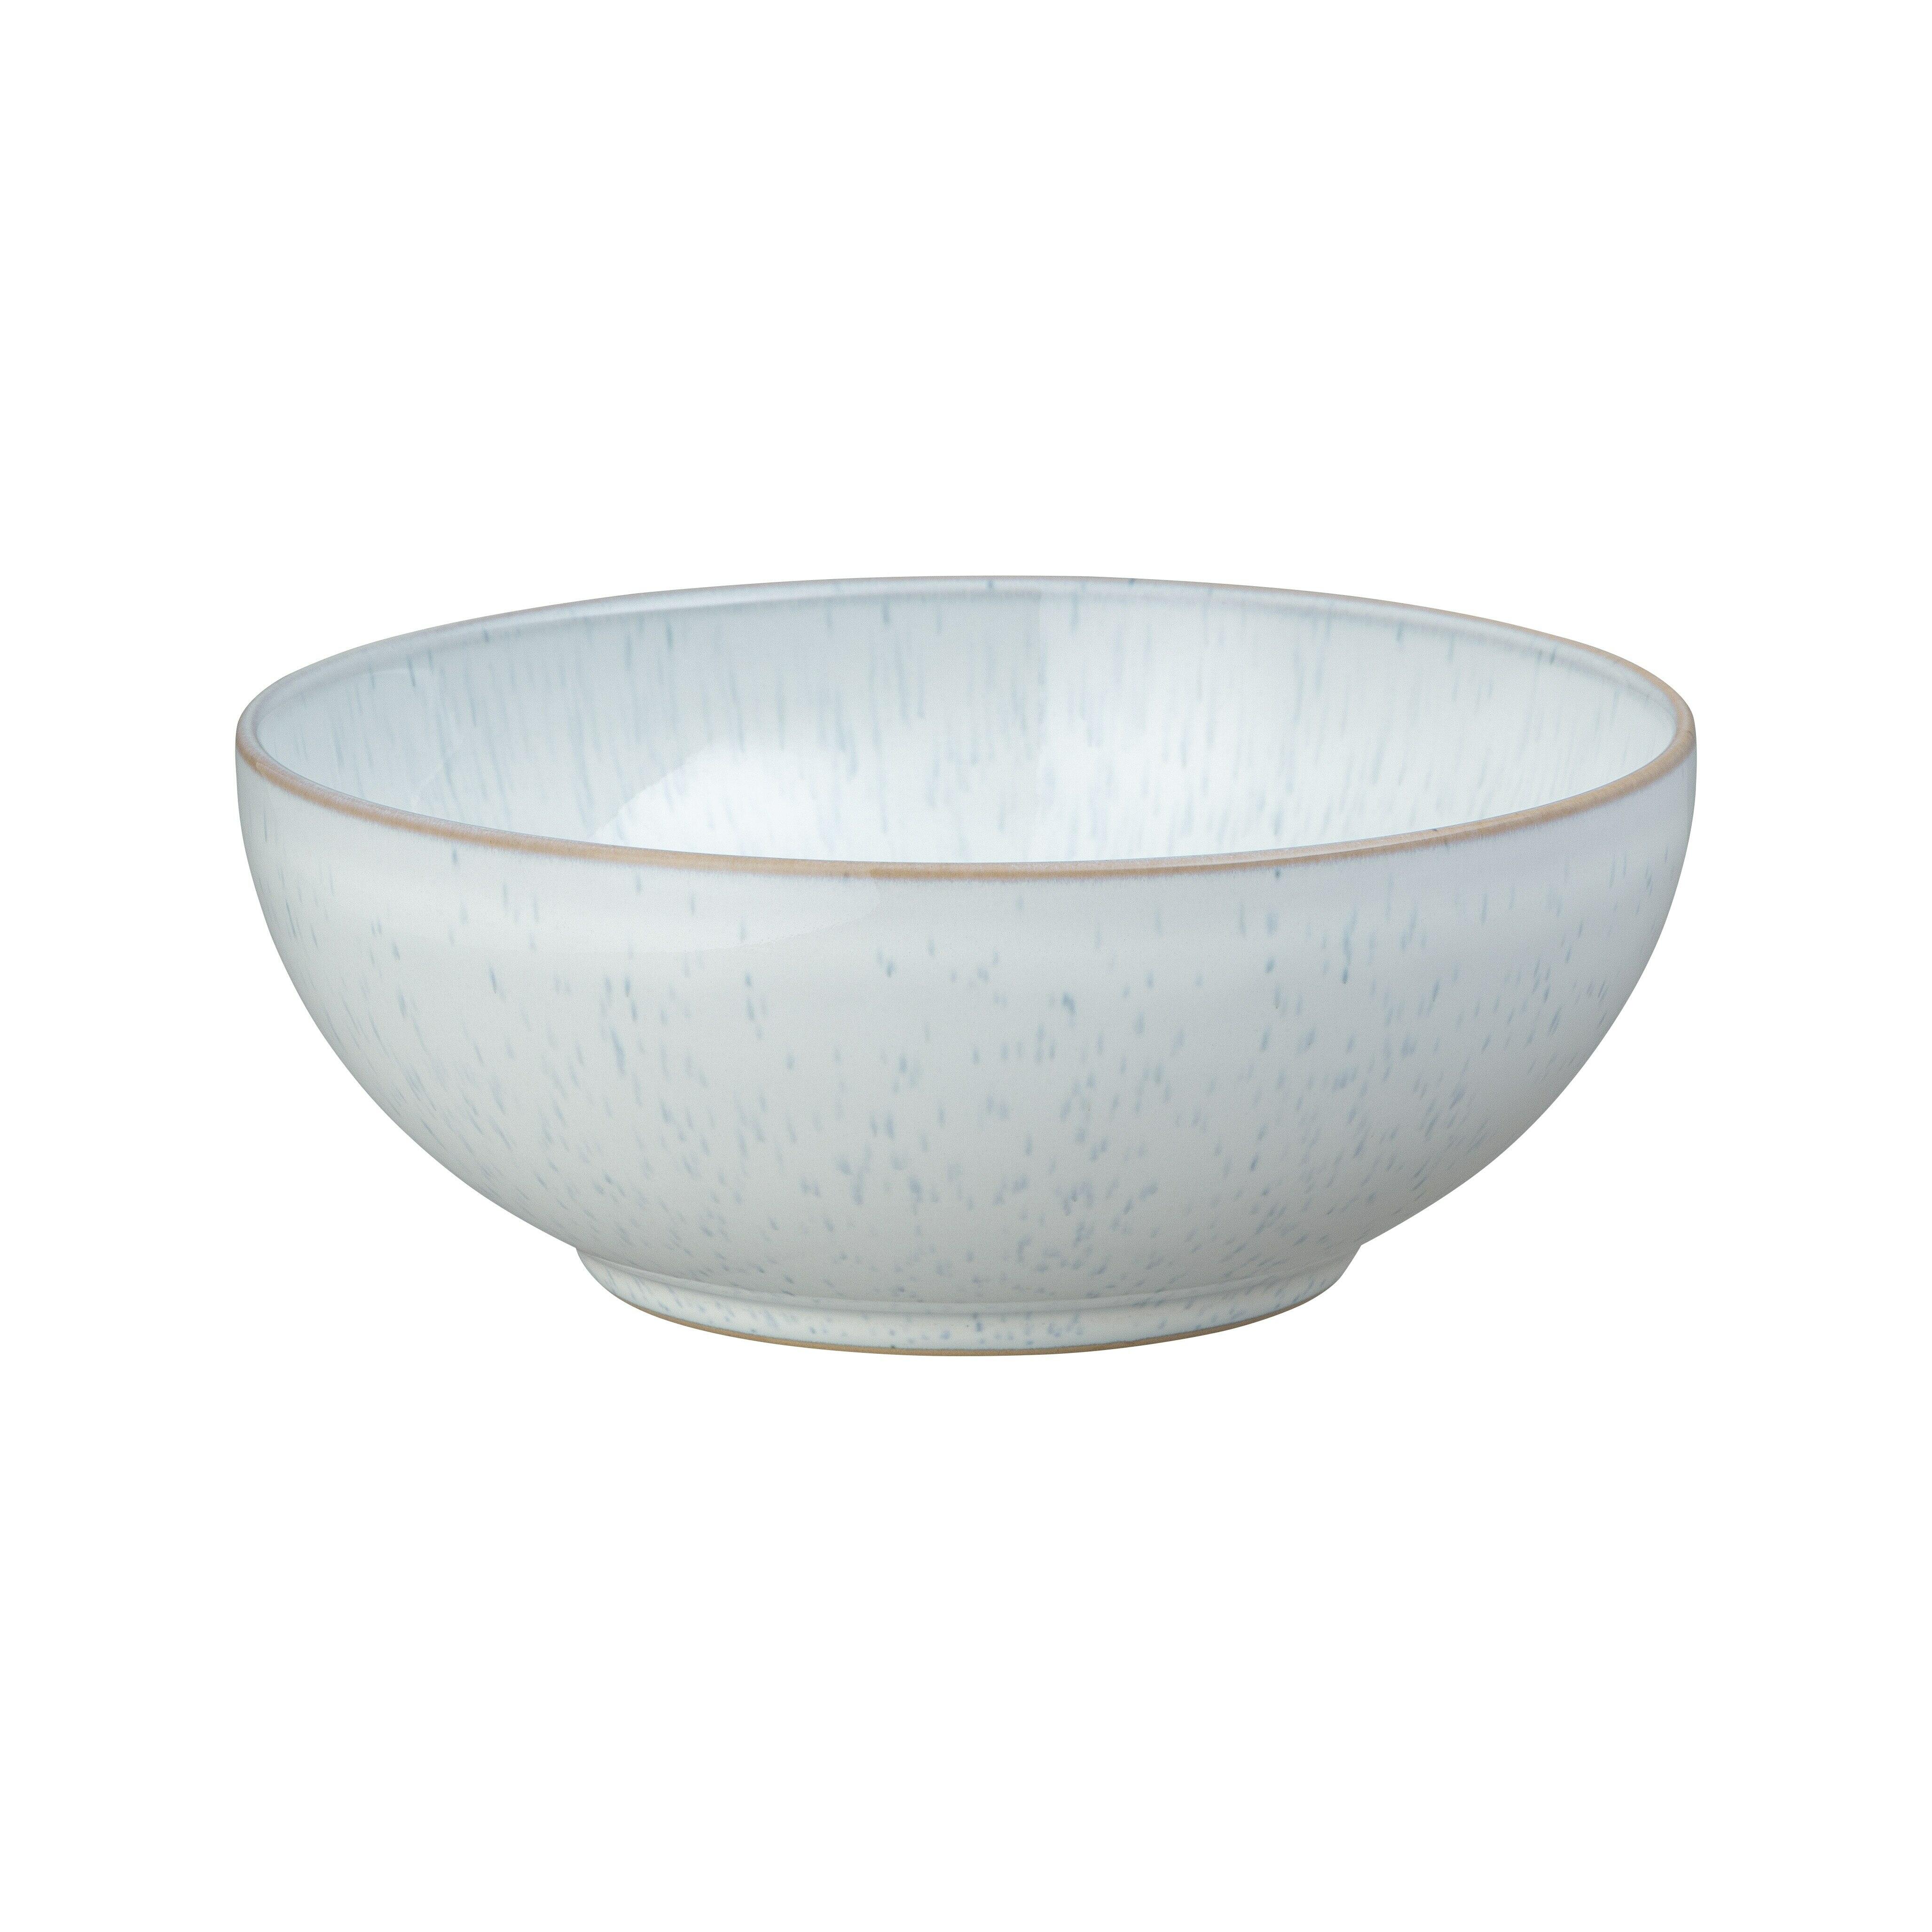 White Speckle Coupe Cereal Bowl